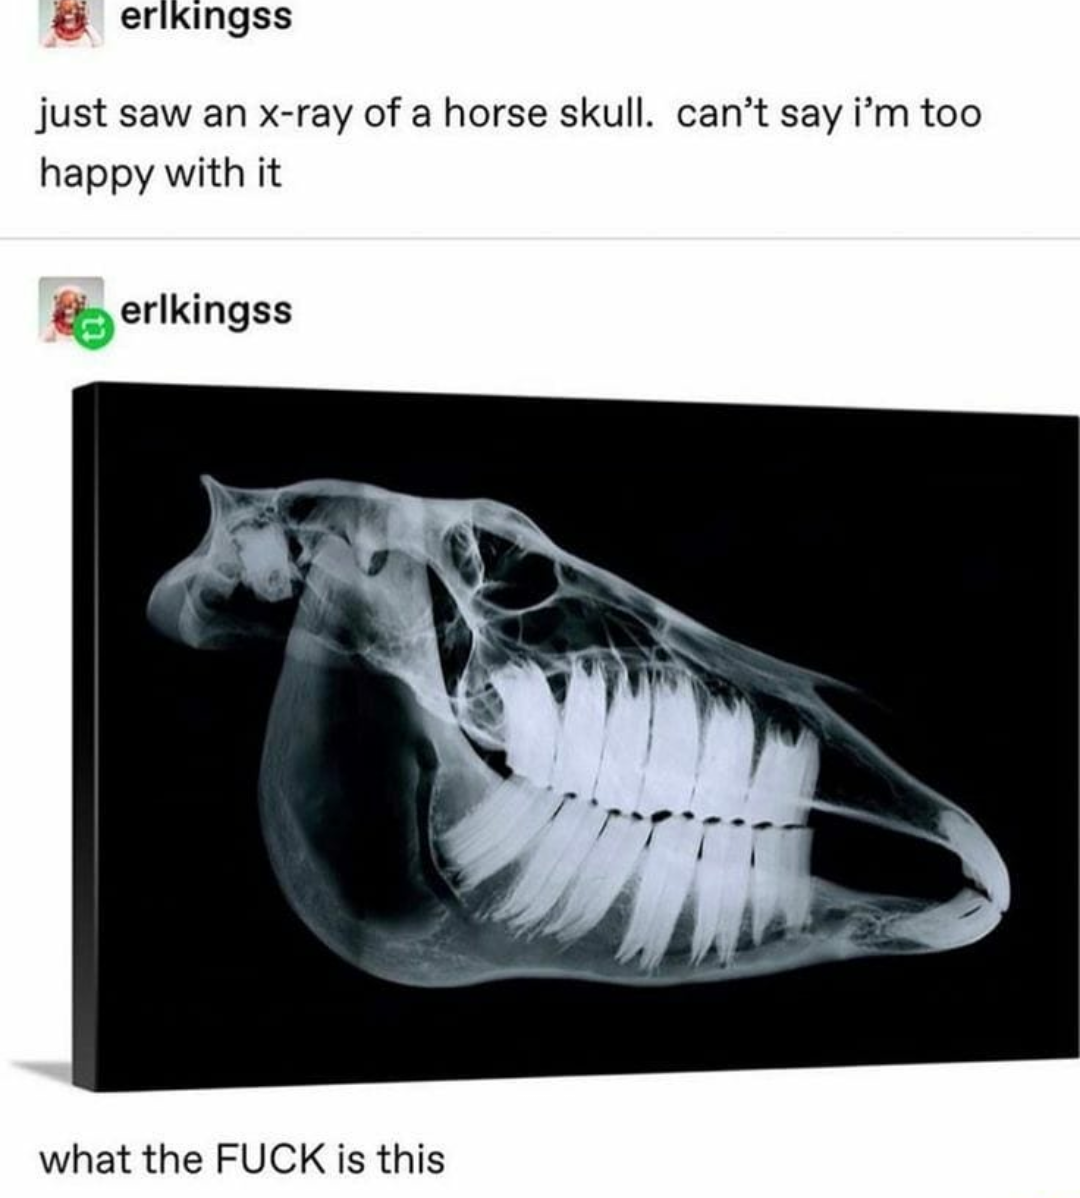 x ray of a horse skull - erikingss just saw an xray of a horse skull. can't say i'm too happy with it erlkingss what the Fuck is this